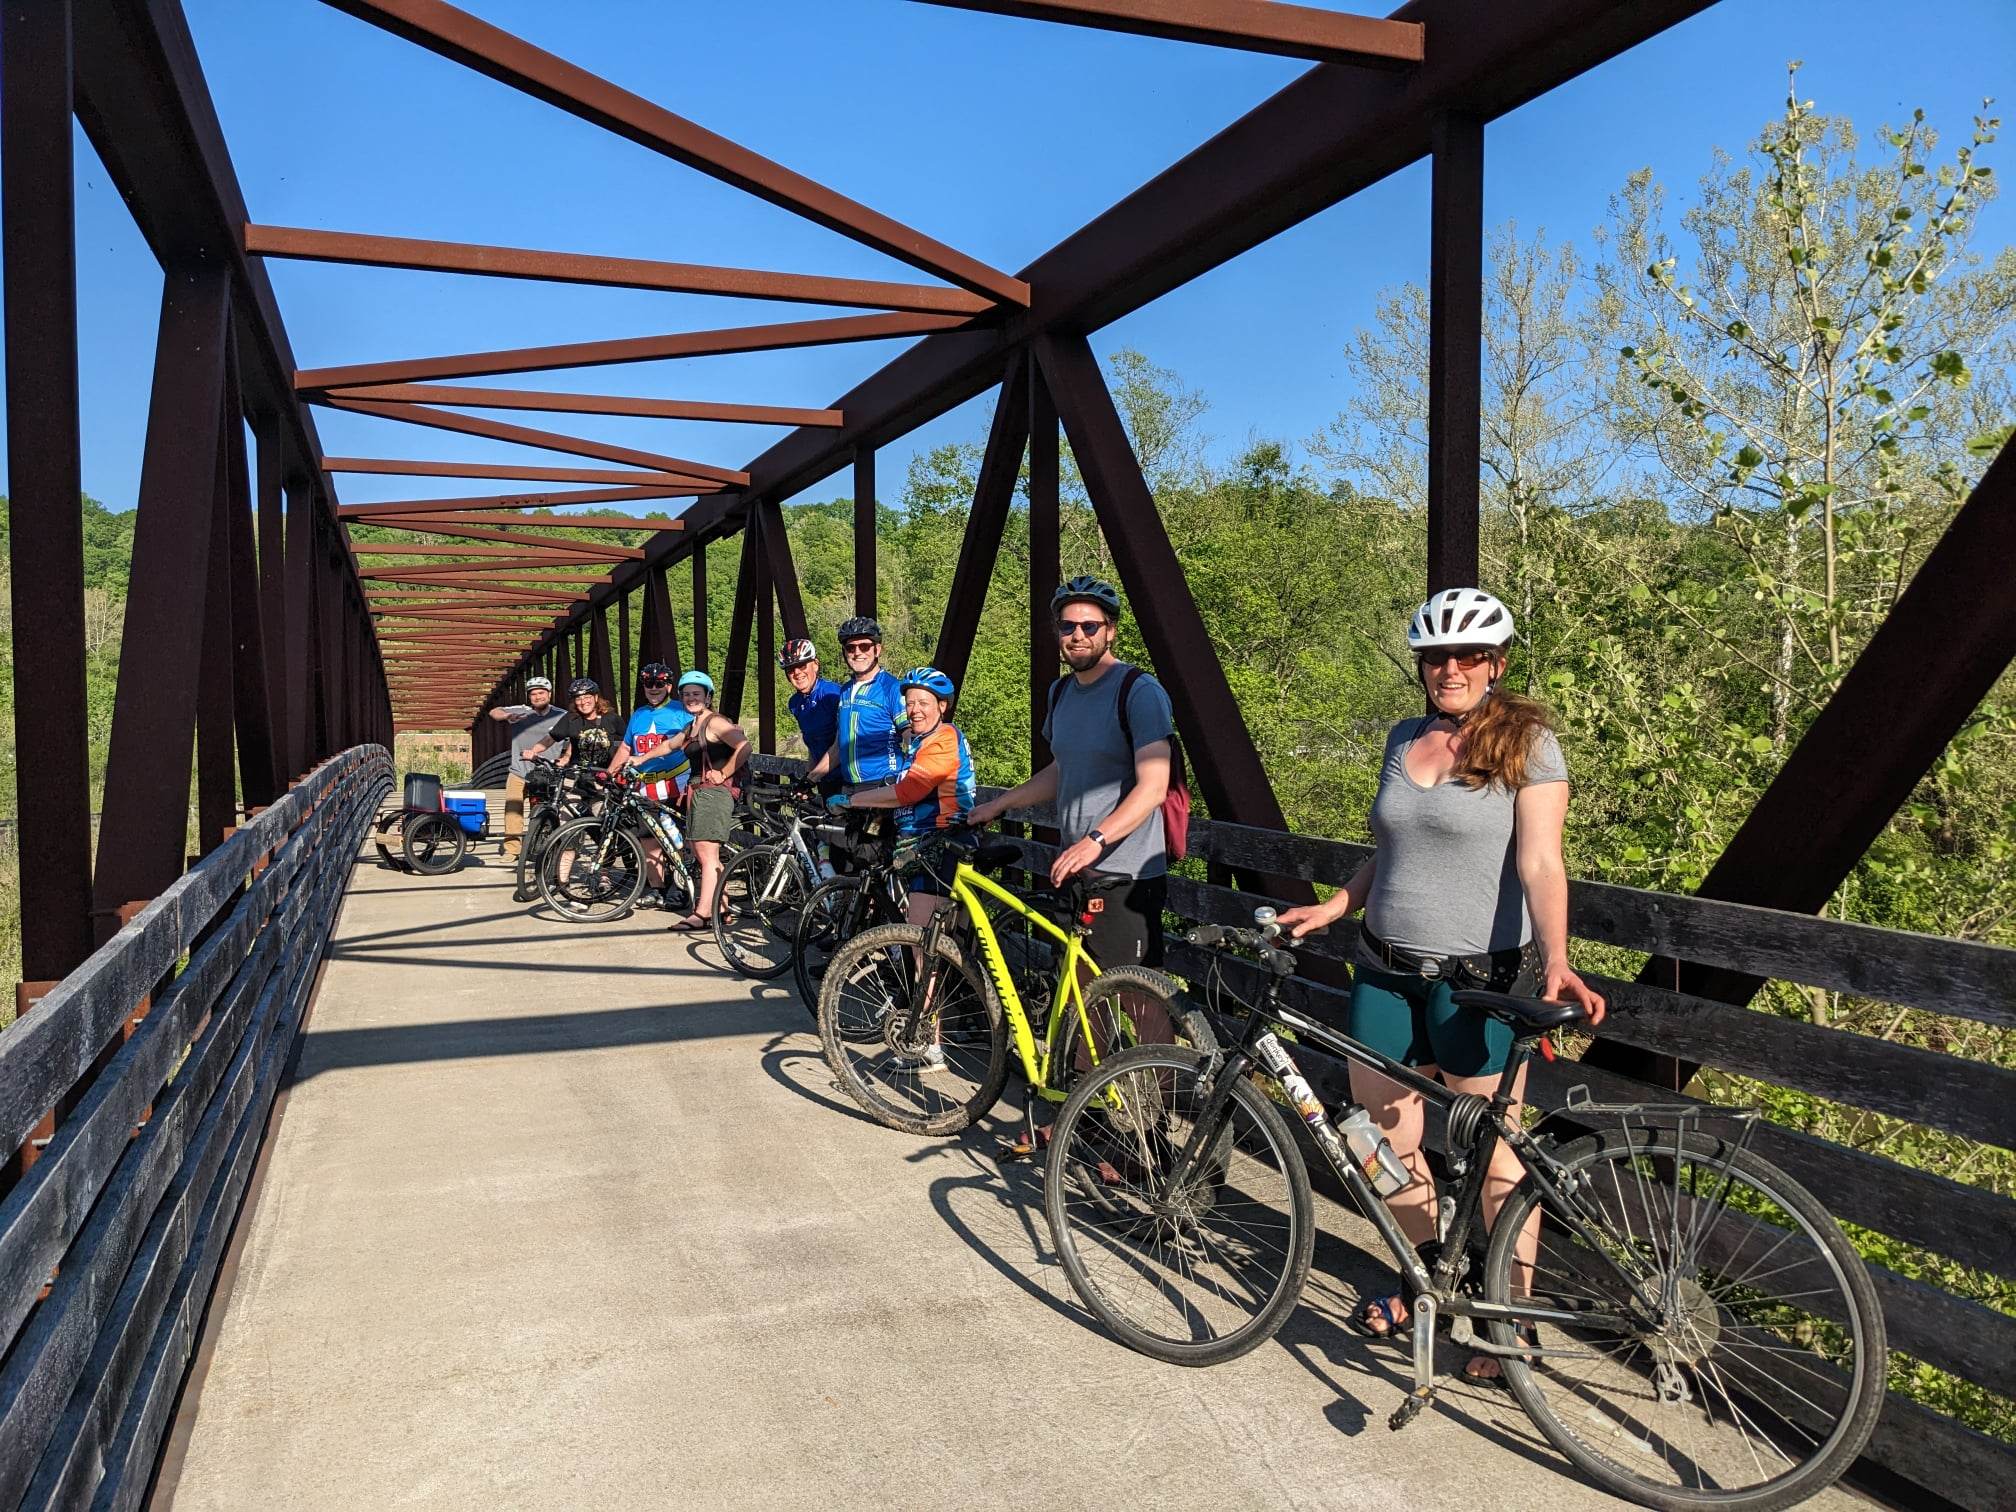 An image of people with bike helmets and bikes, pictured on an outdoor bridge.